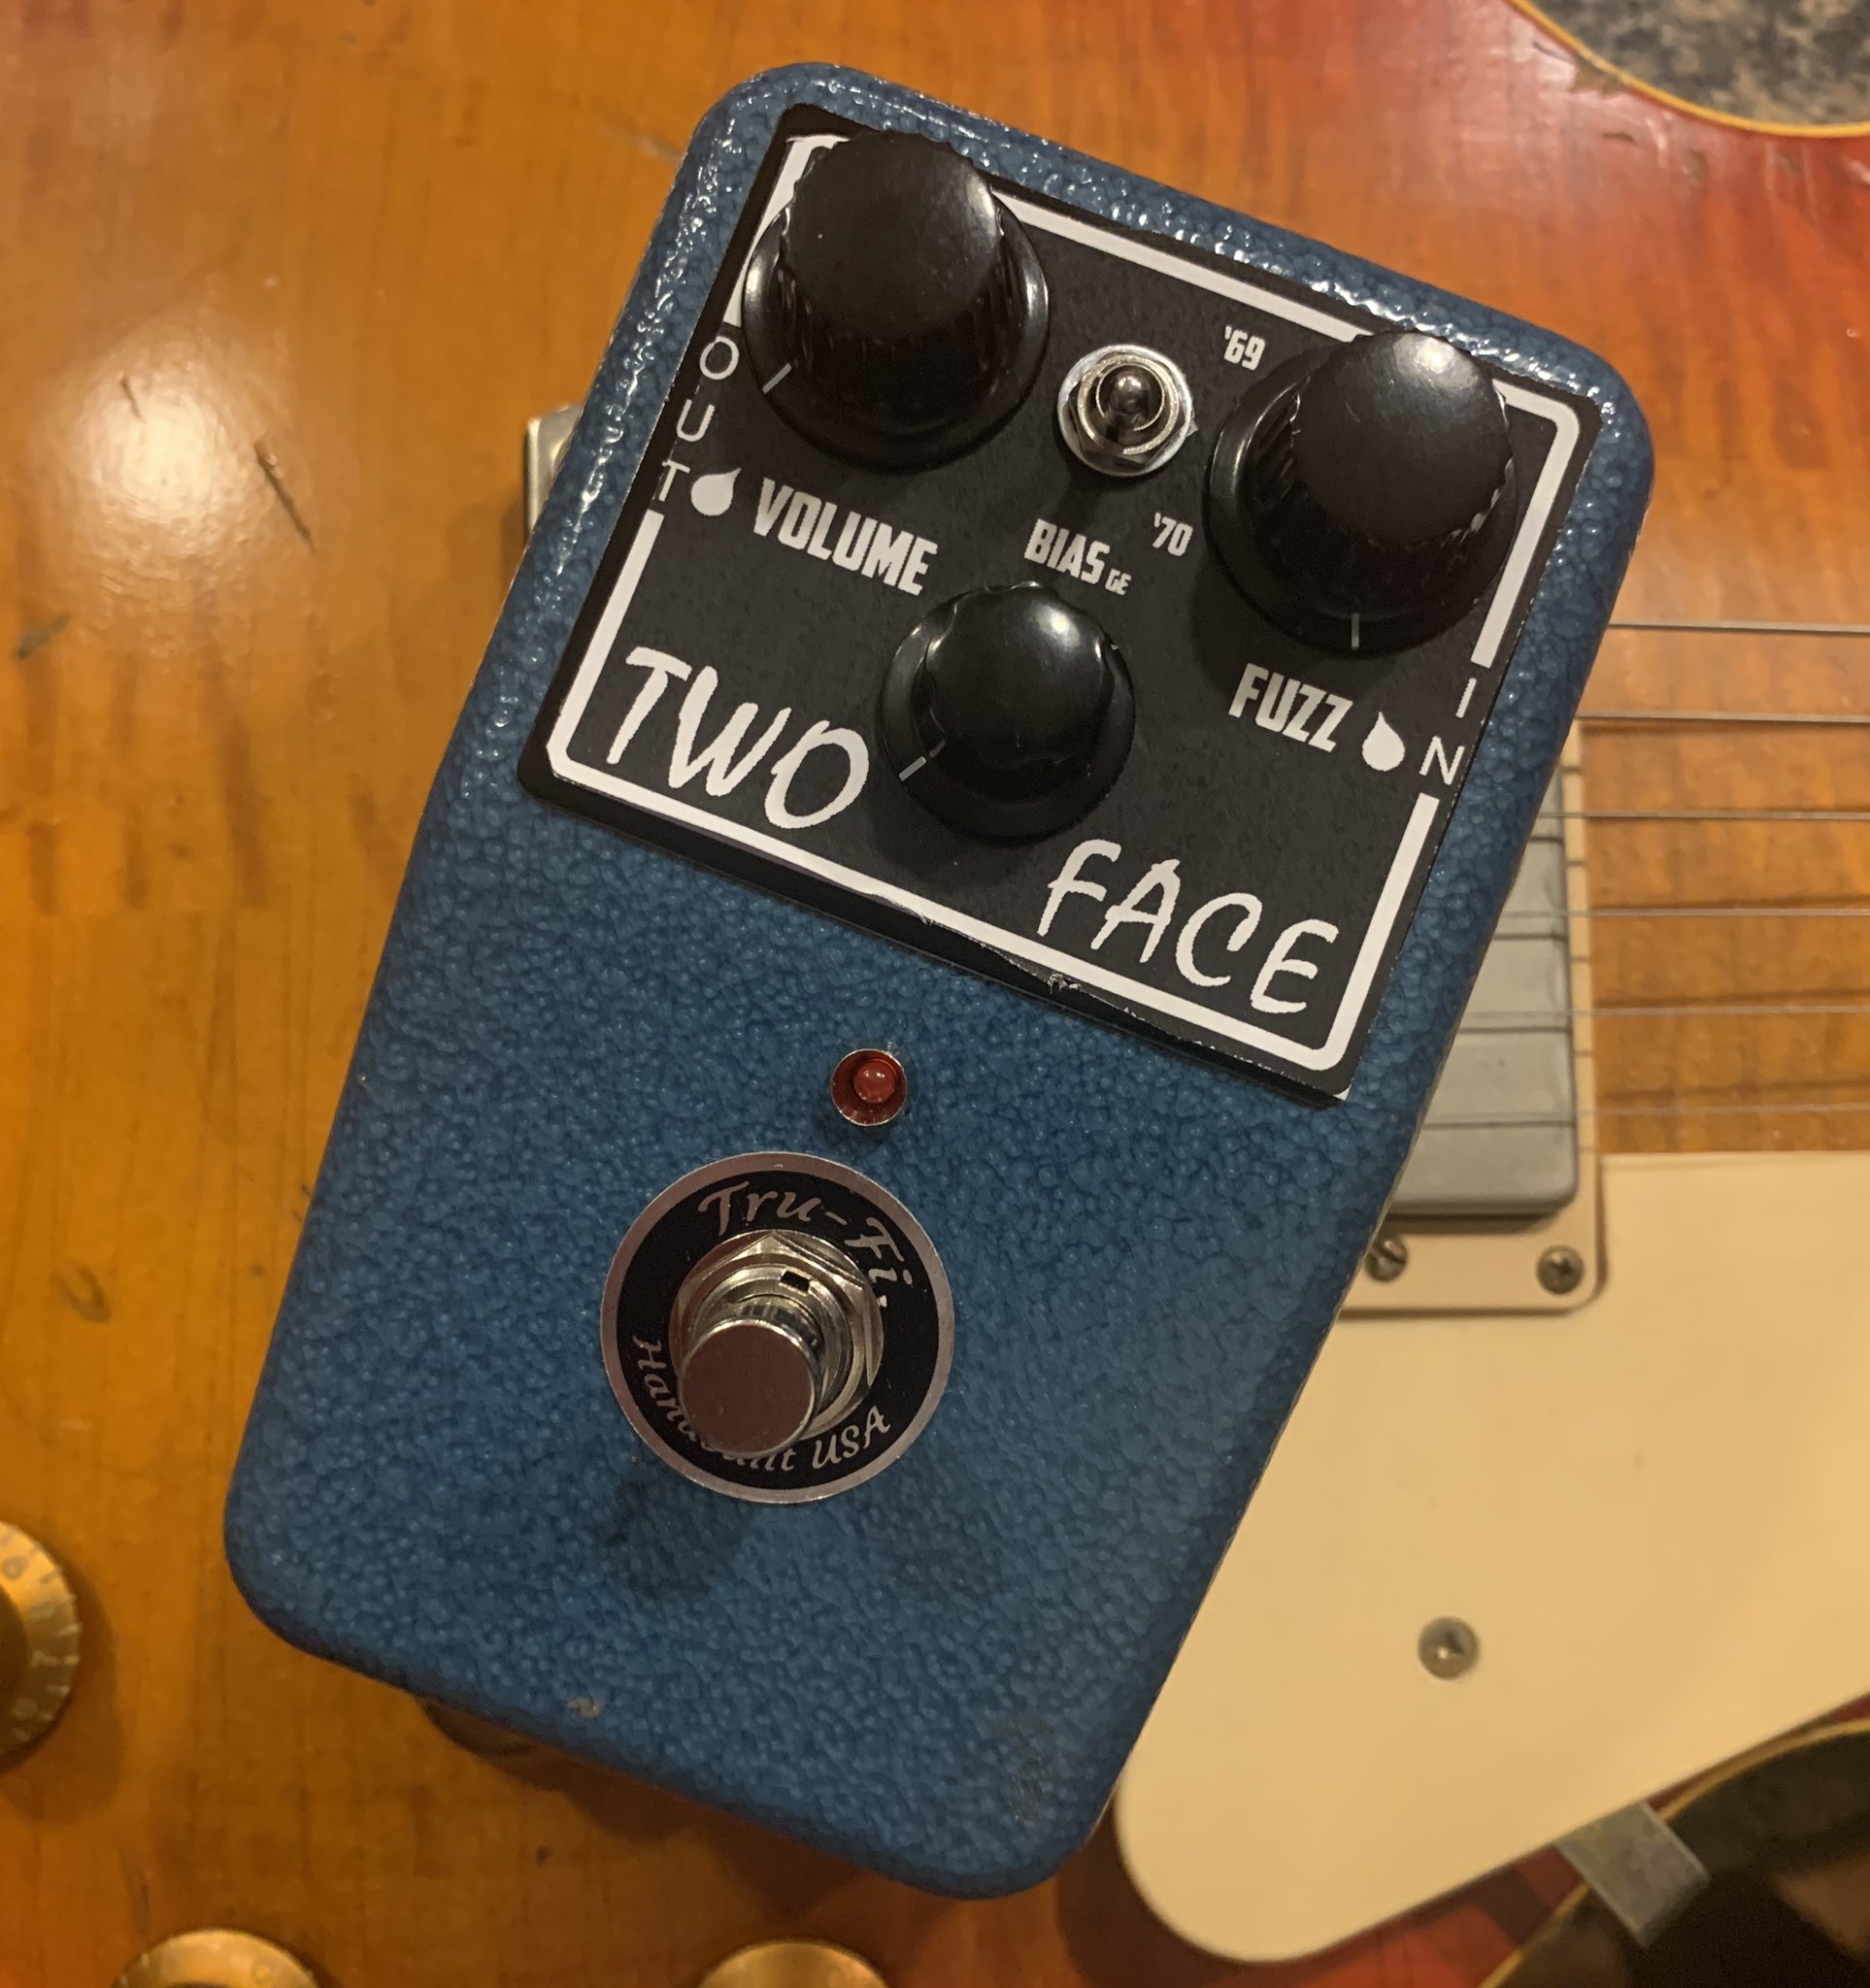 Tru Fi Guitar Pedals on X: "SNEAK PEAK   The Two Face a switchable